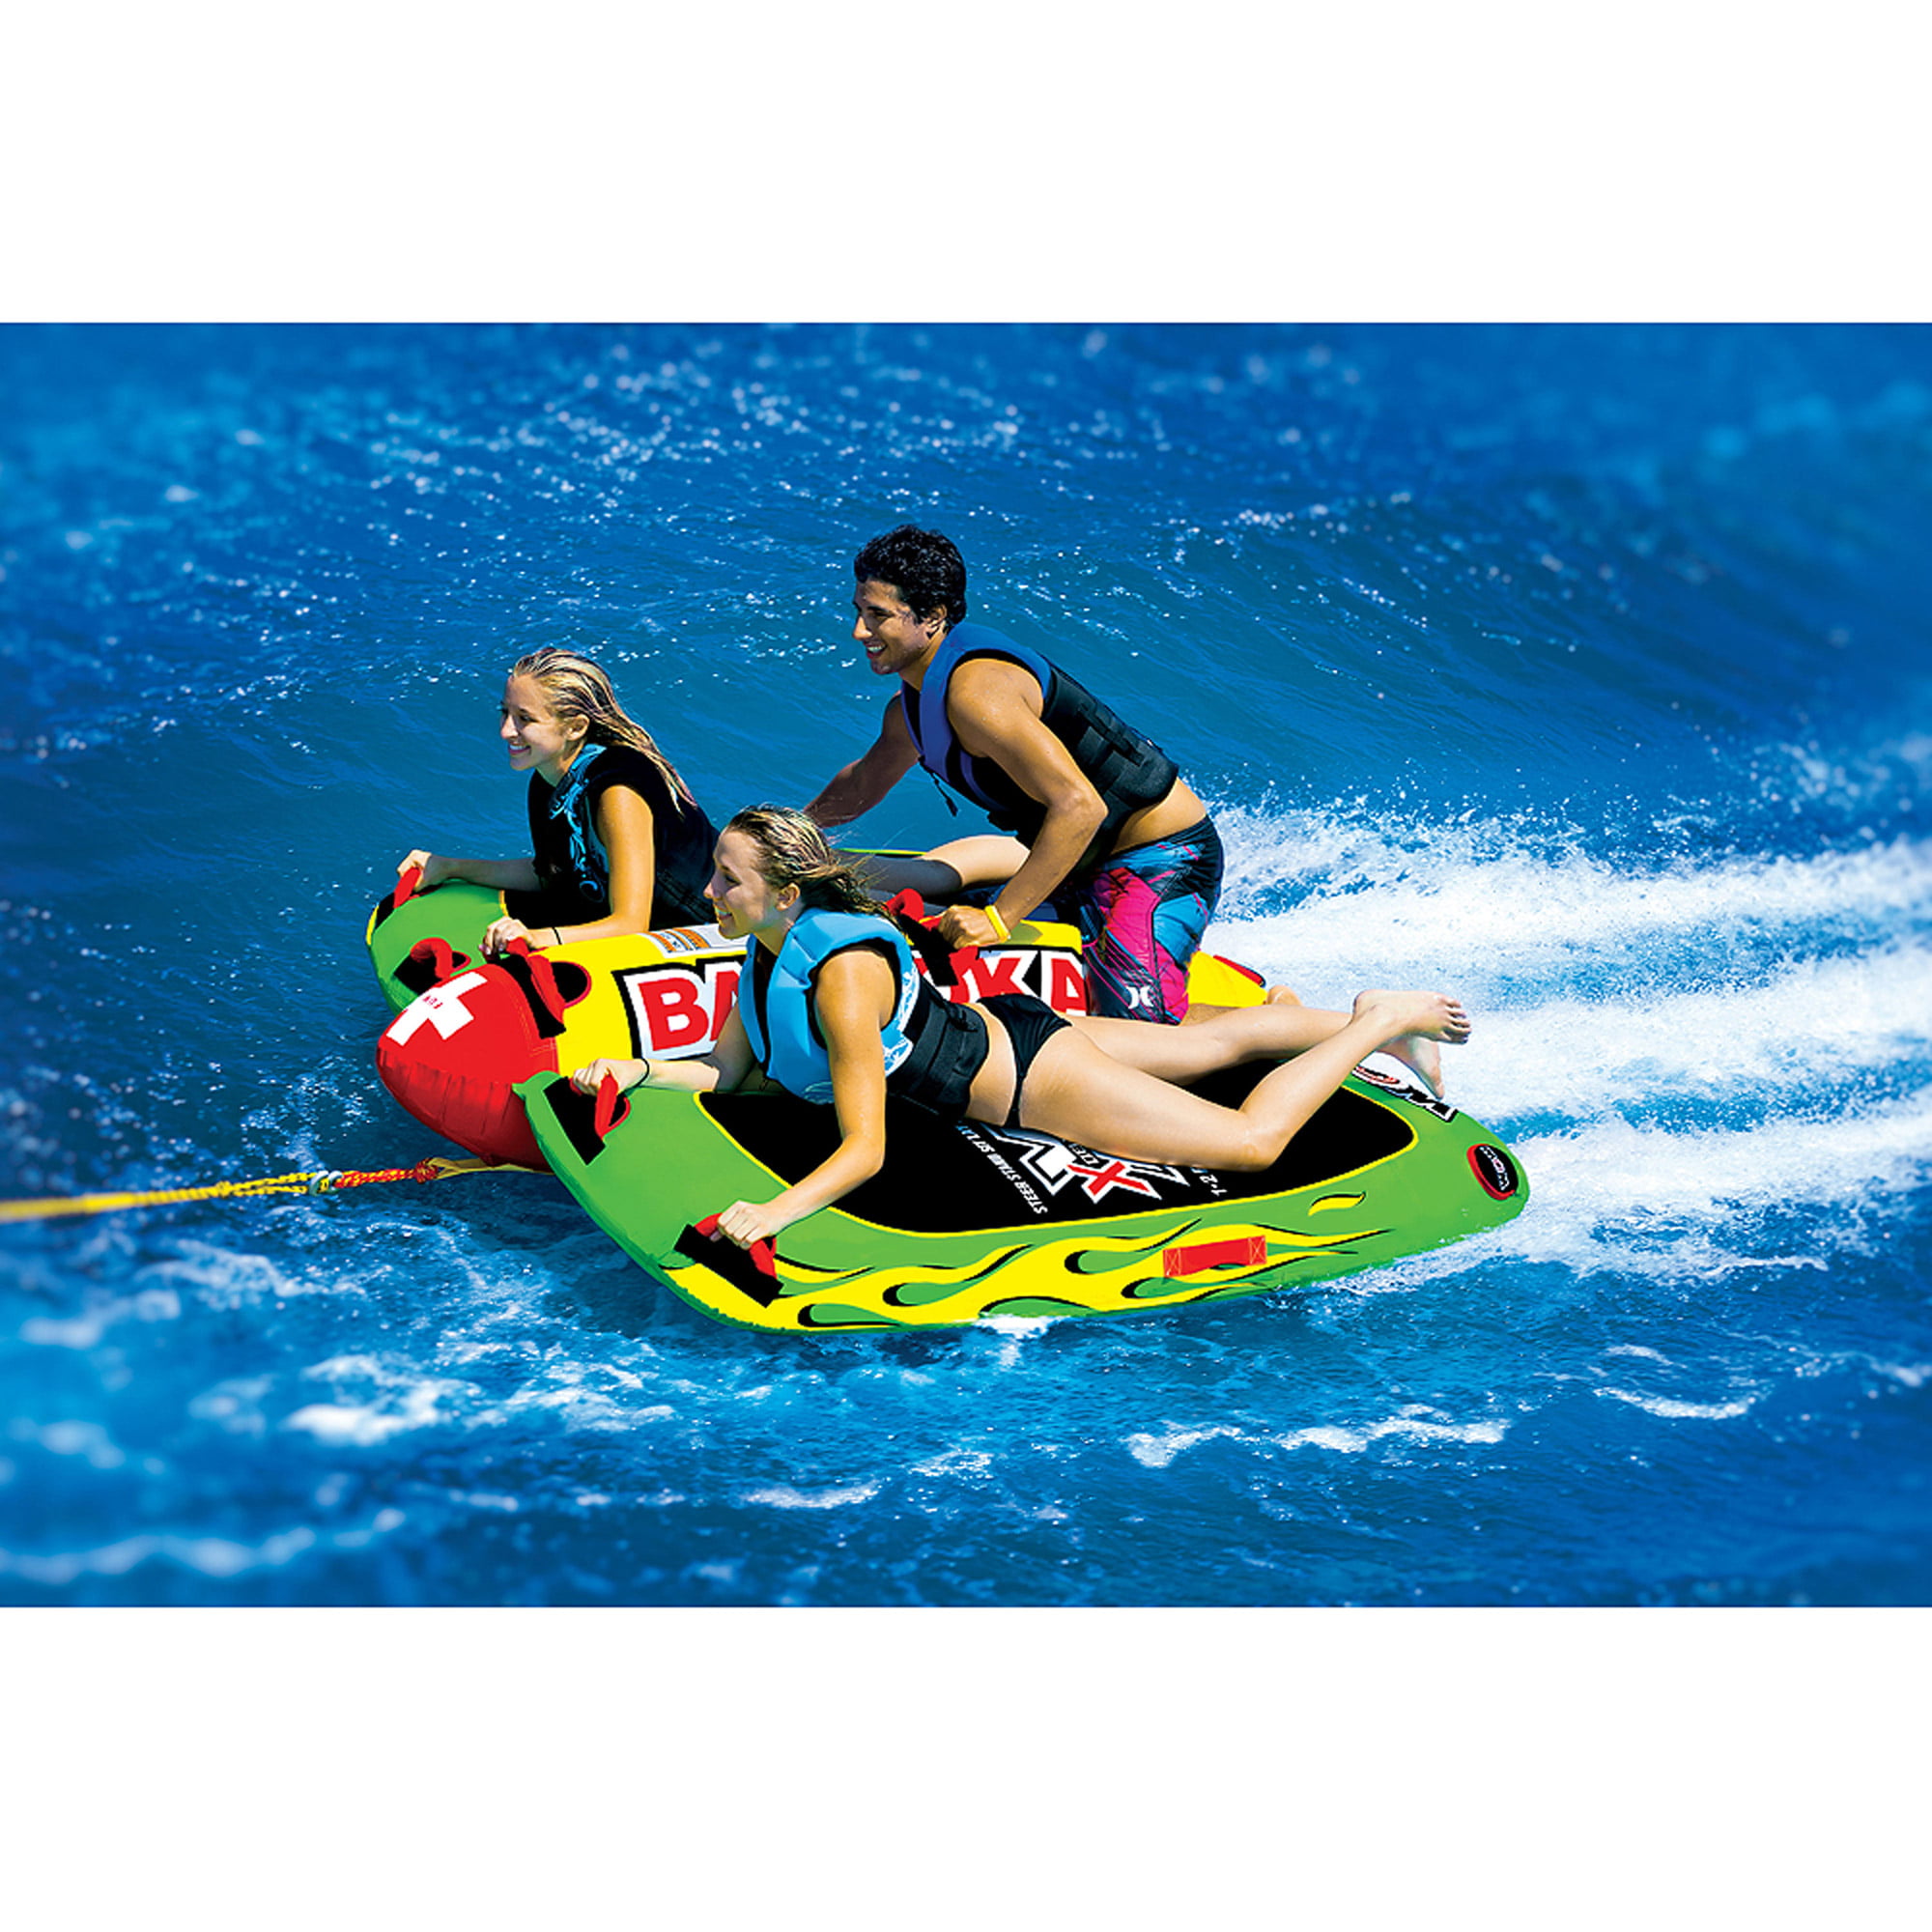 WOW World of Watersports Jet Boat 2 Person Towable for sale online 